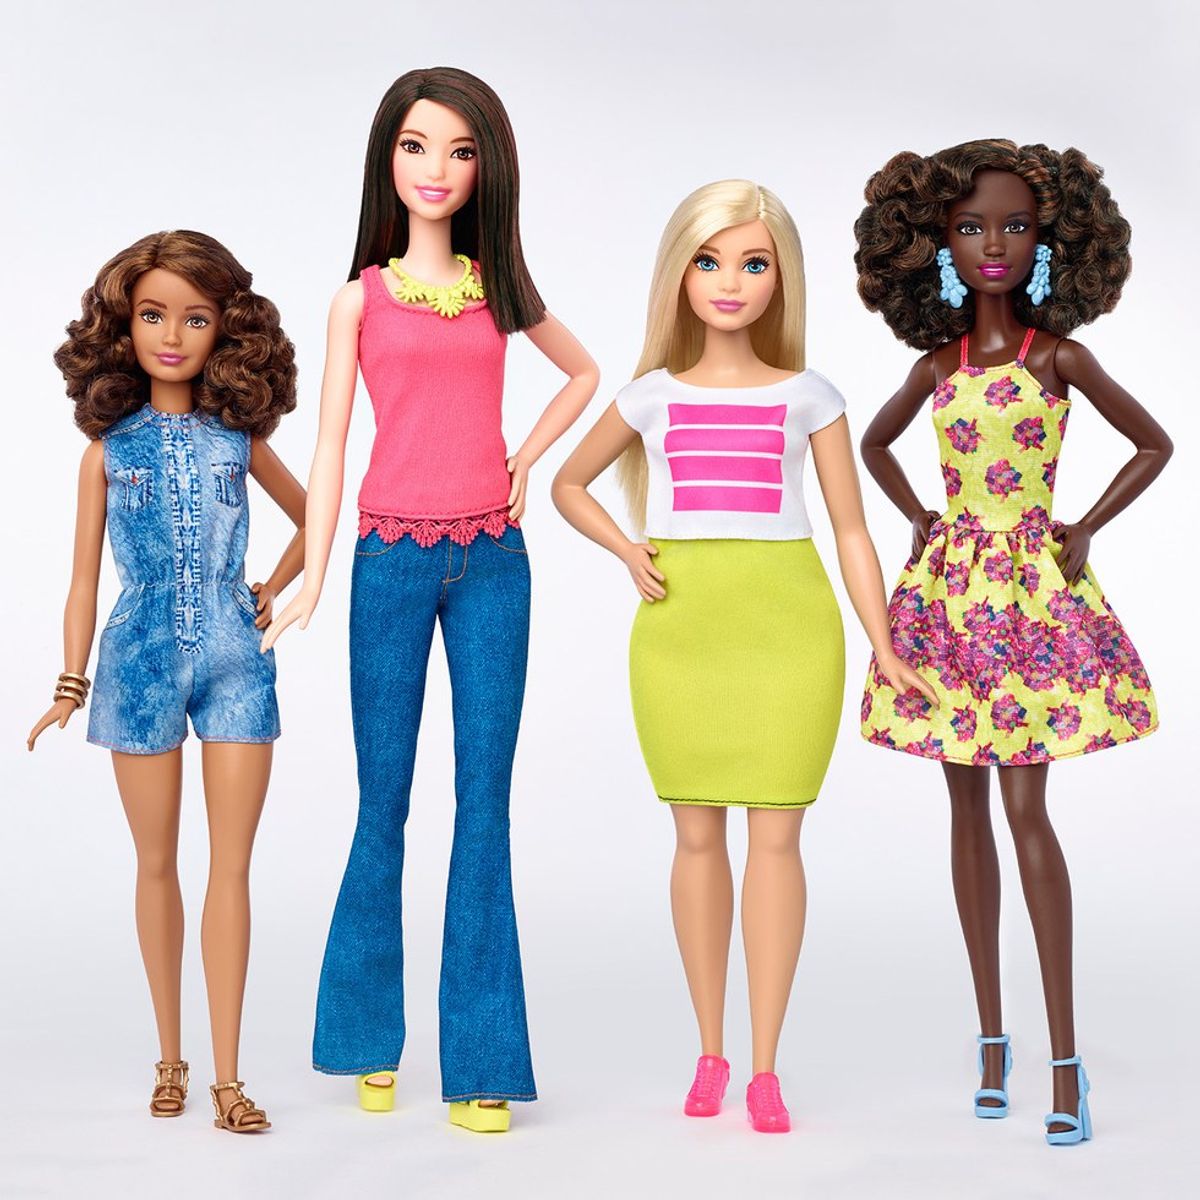 It's About Time Barbie Looked Like A Normal Girl